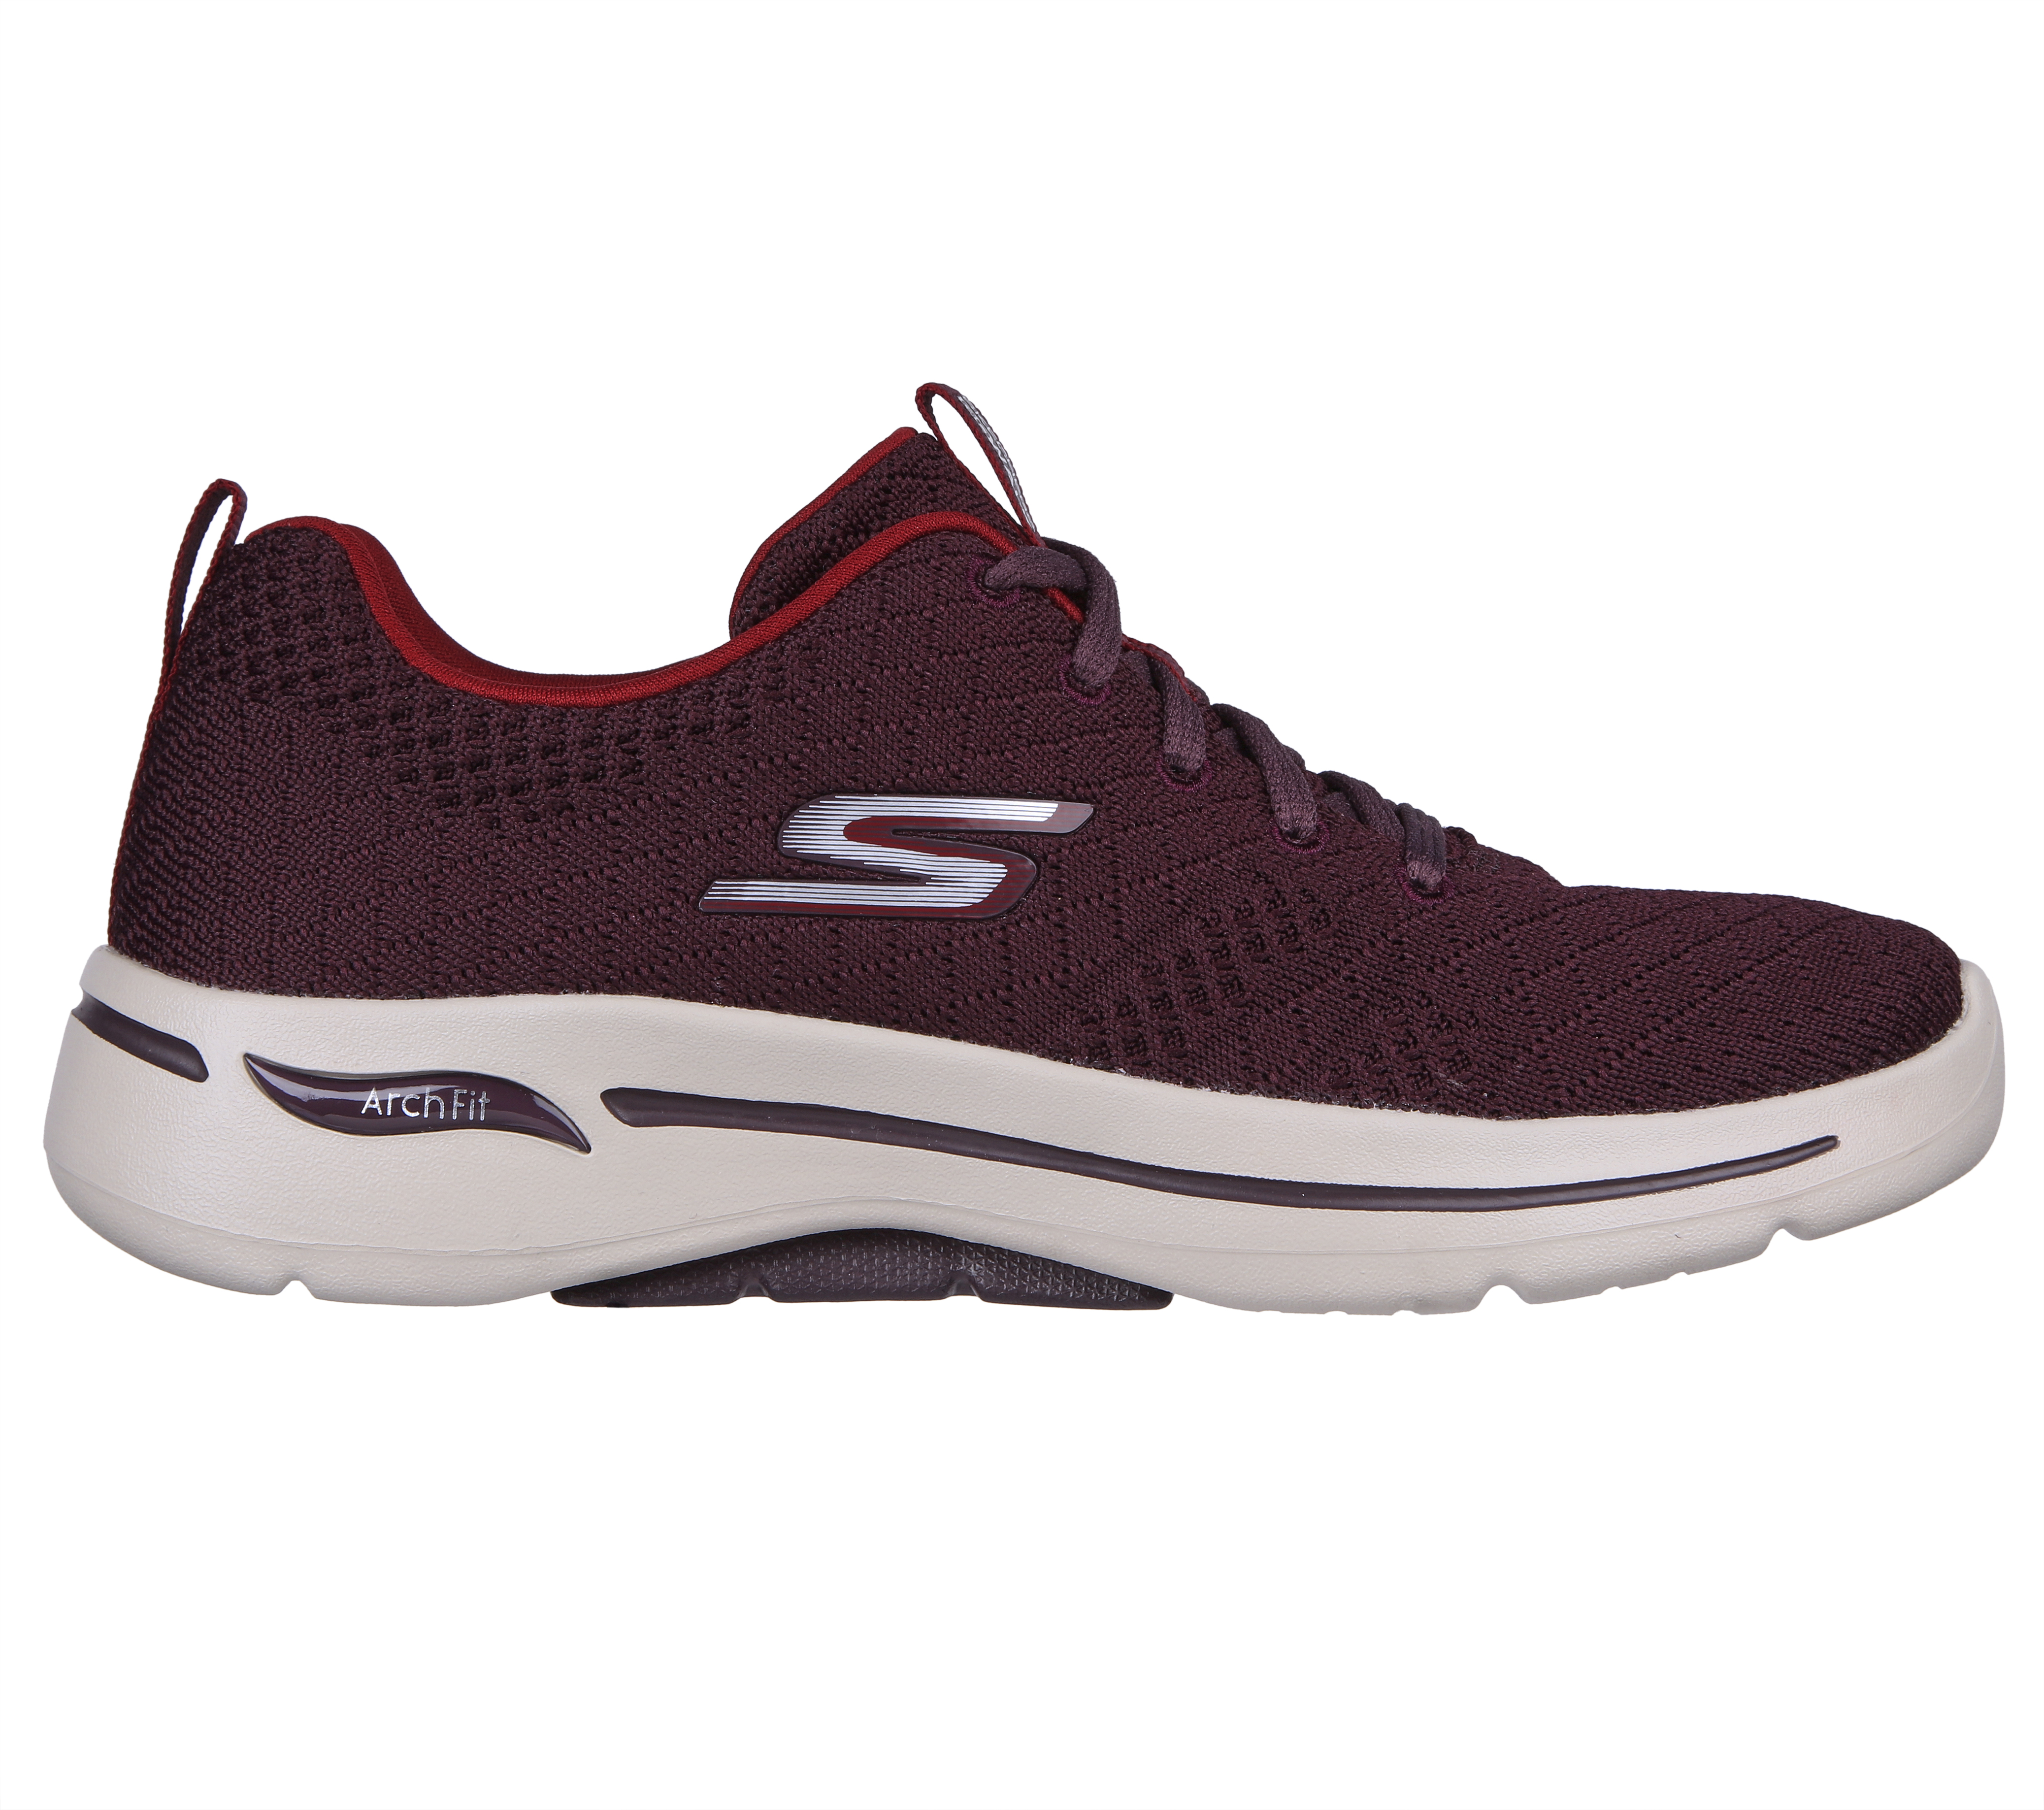 Go Walk Arch Fit Sneakers